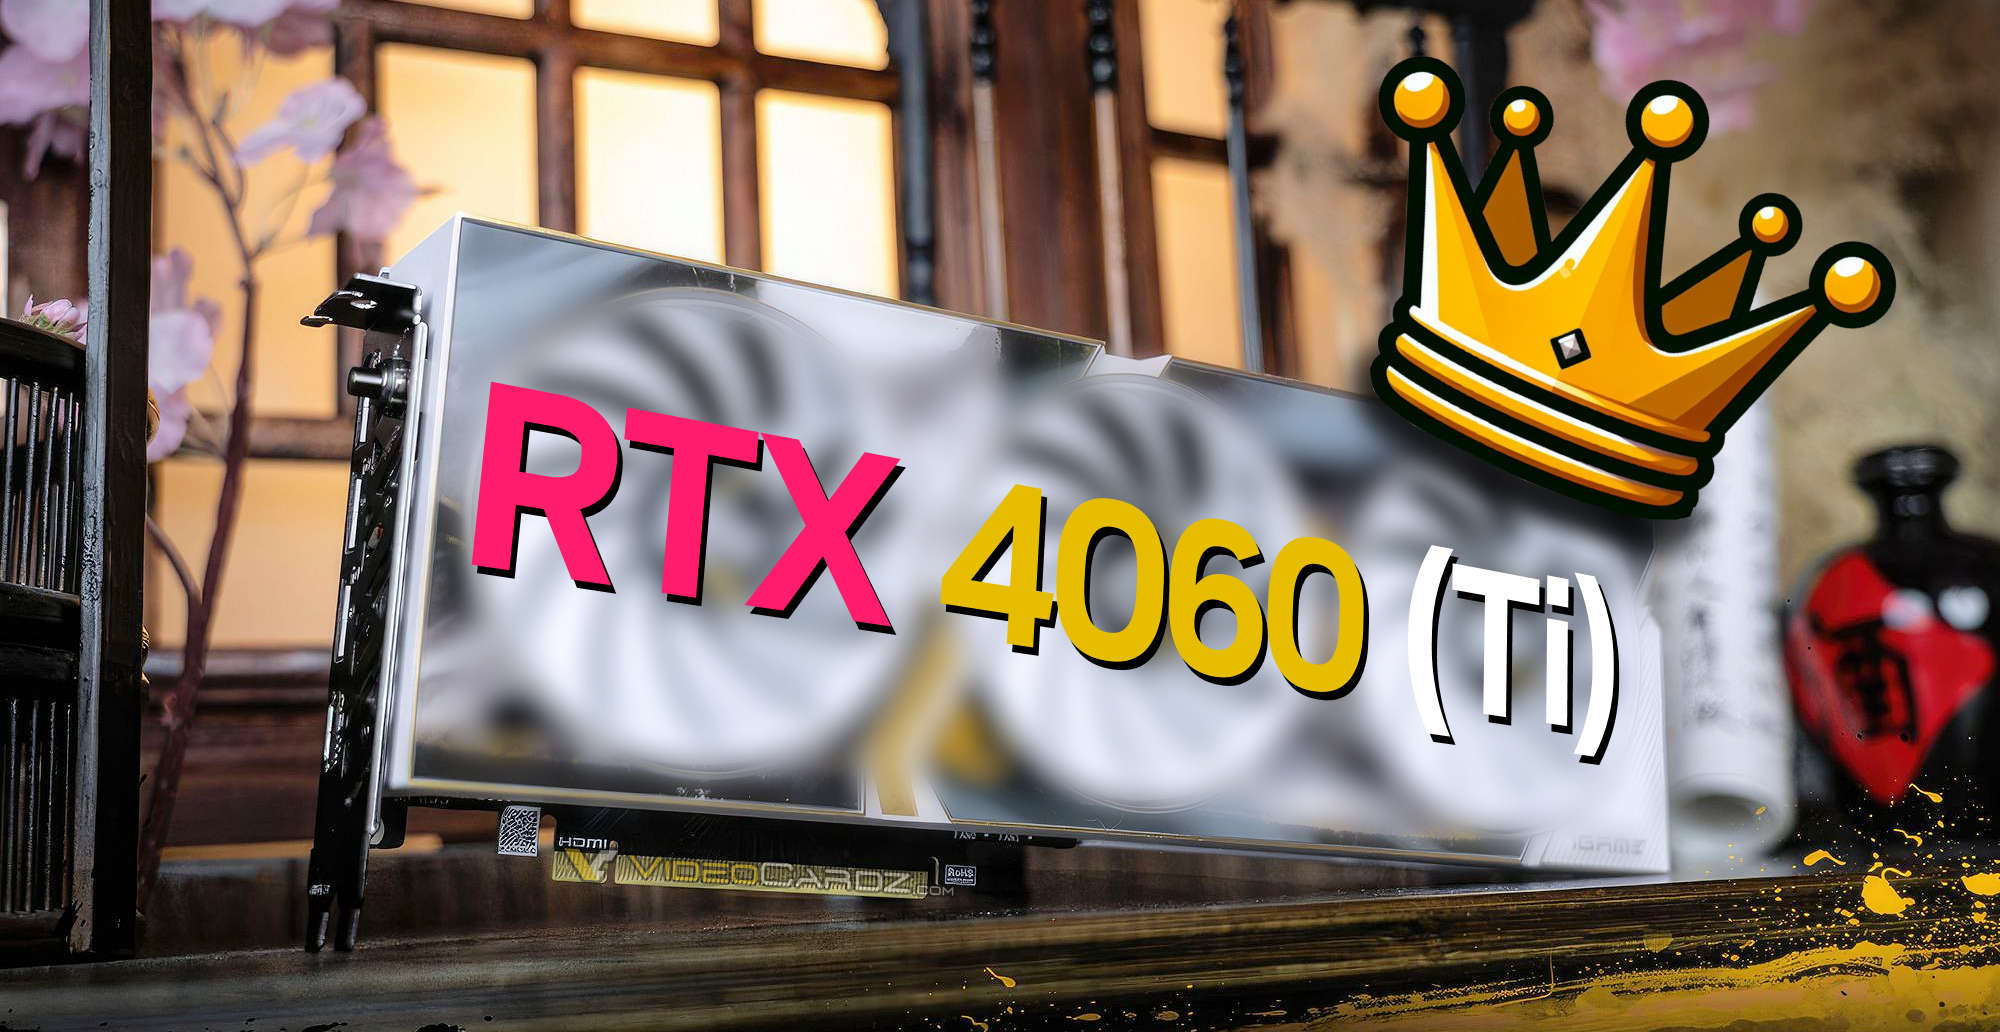 RTX 4060 conquers DIY market in Korea, dethroning its predecessor RTX 3060 with unmatched performance